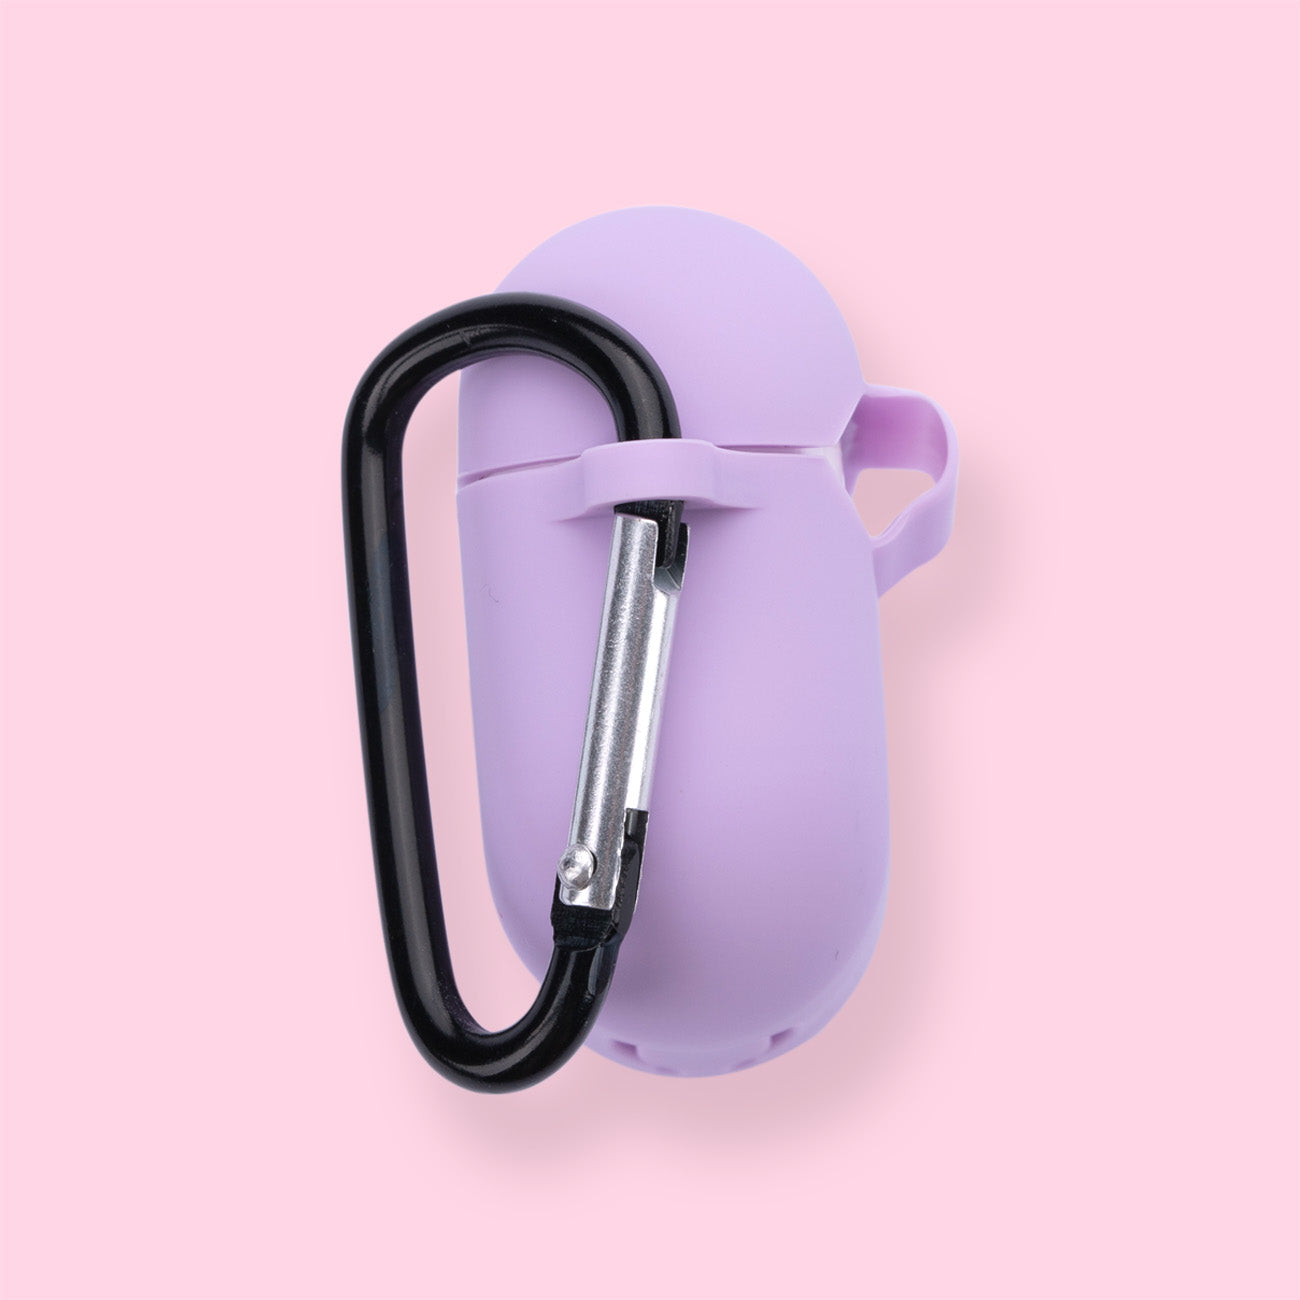 AirPods 3rd Generation Case - Purple